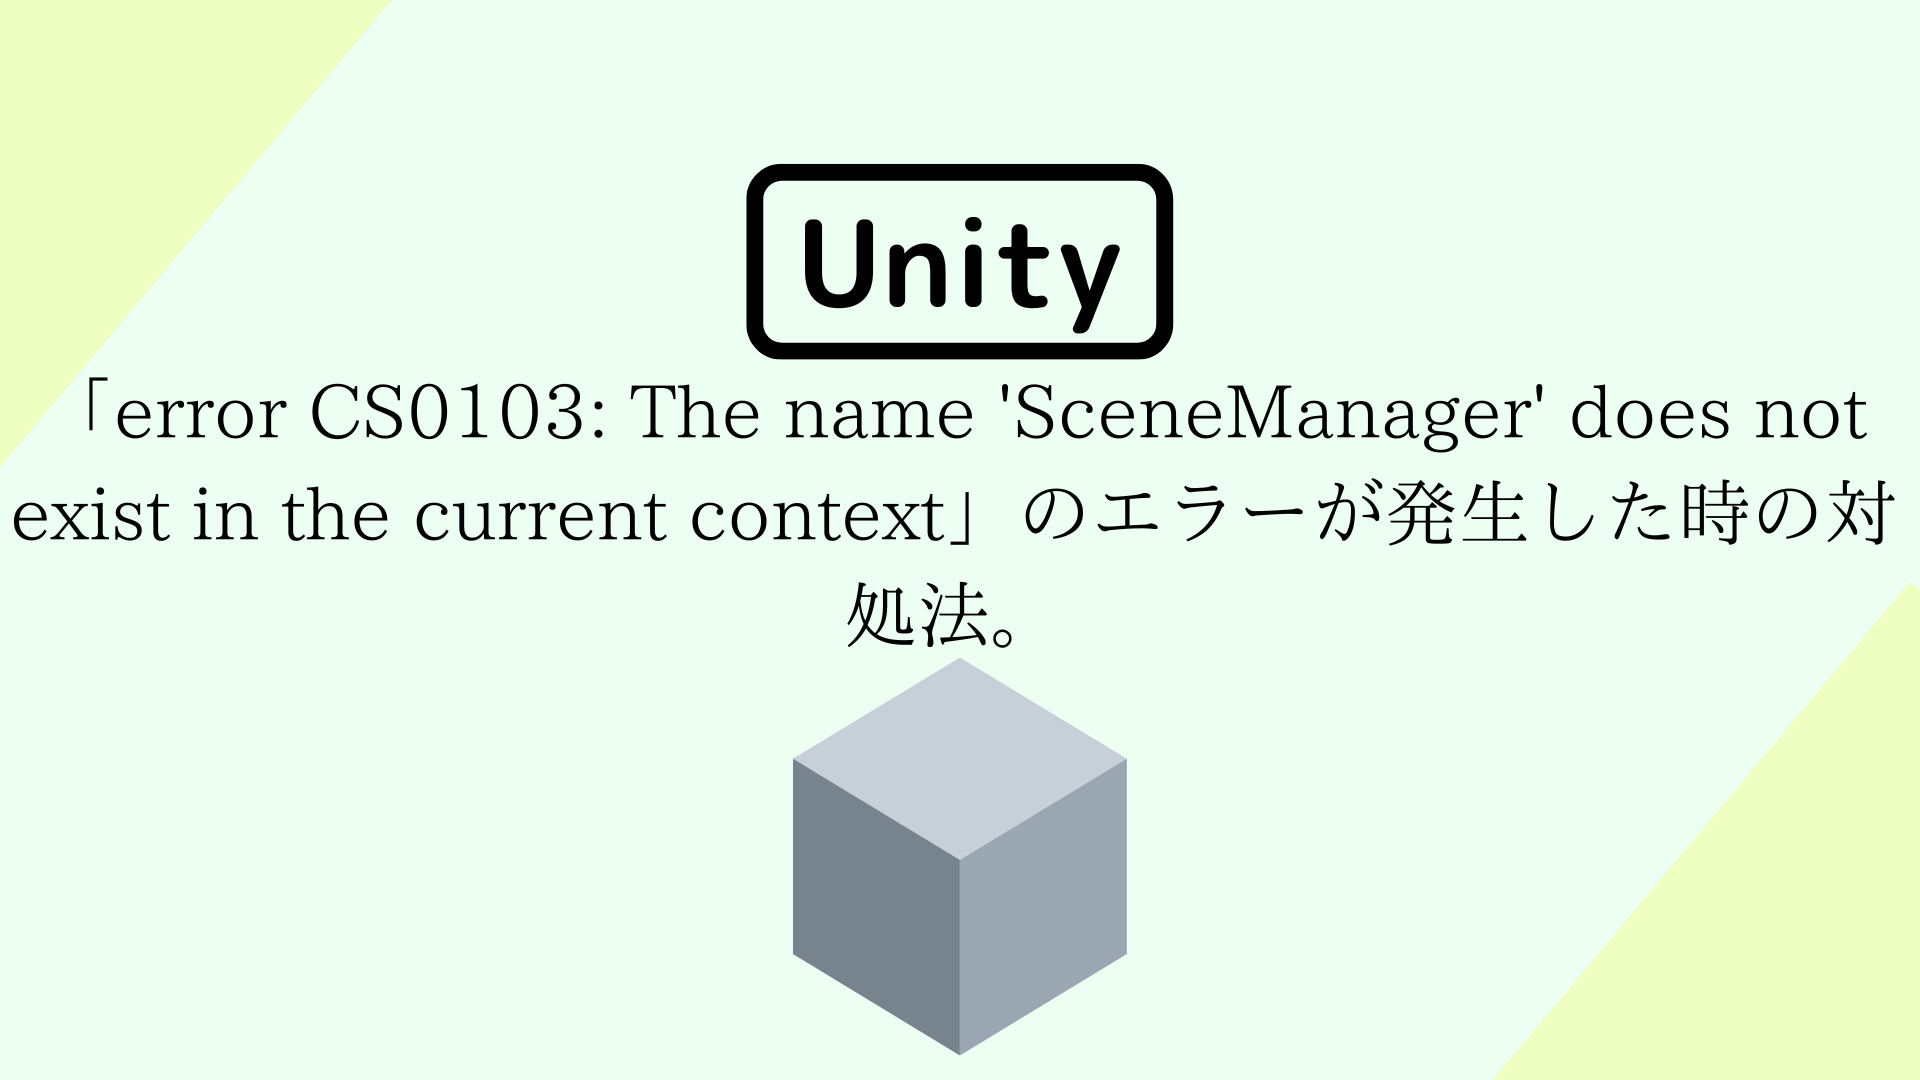 [Unity] シーン切り替えしようとした時に、「error CS0103: The name 'SceneManager' does not exist in the current context」のエラーが発生した時の対処法。